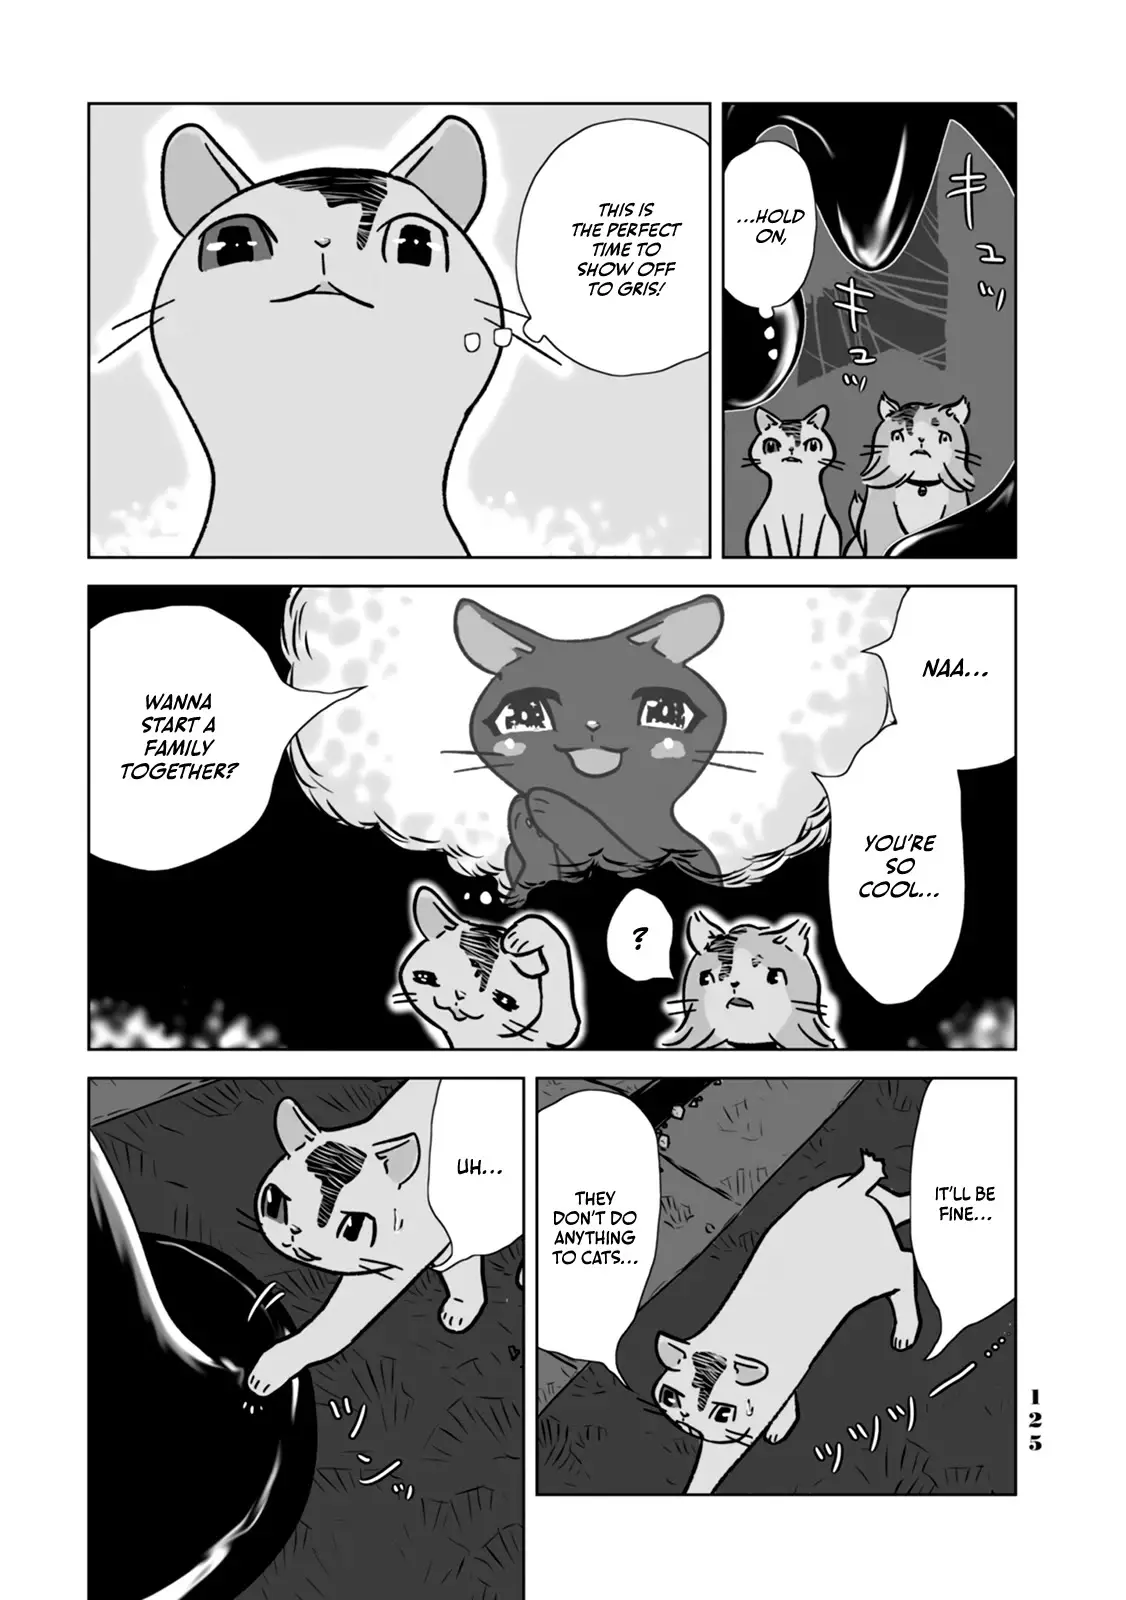 No Cats Were Harmed In This Comic. - 7 page 7-4cf1e5e1